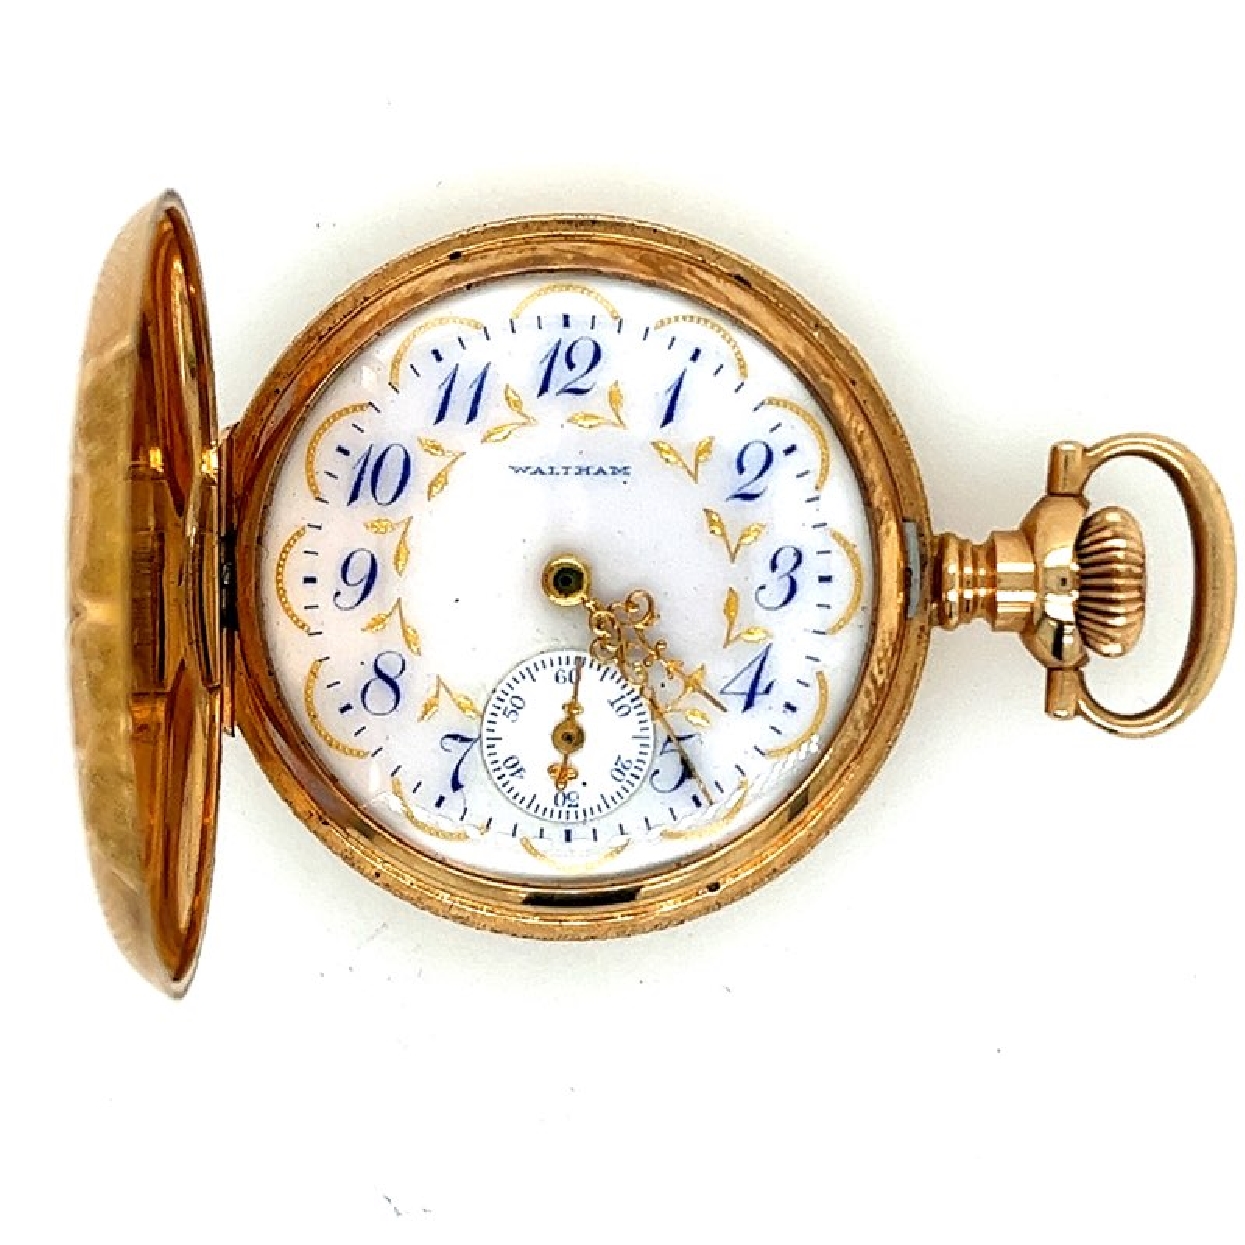 14K Gold 1897 Waltham Pocket Watch with Blue Hand Painted Numerals

SN- 8290770